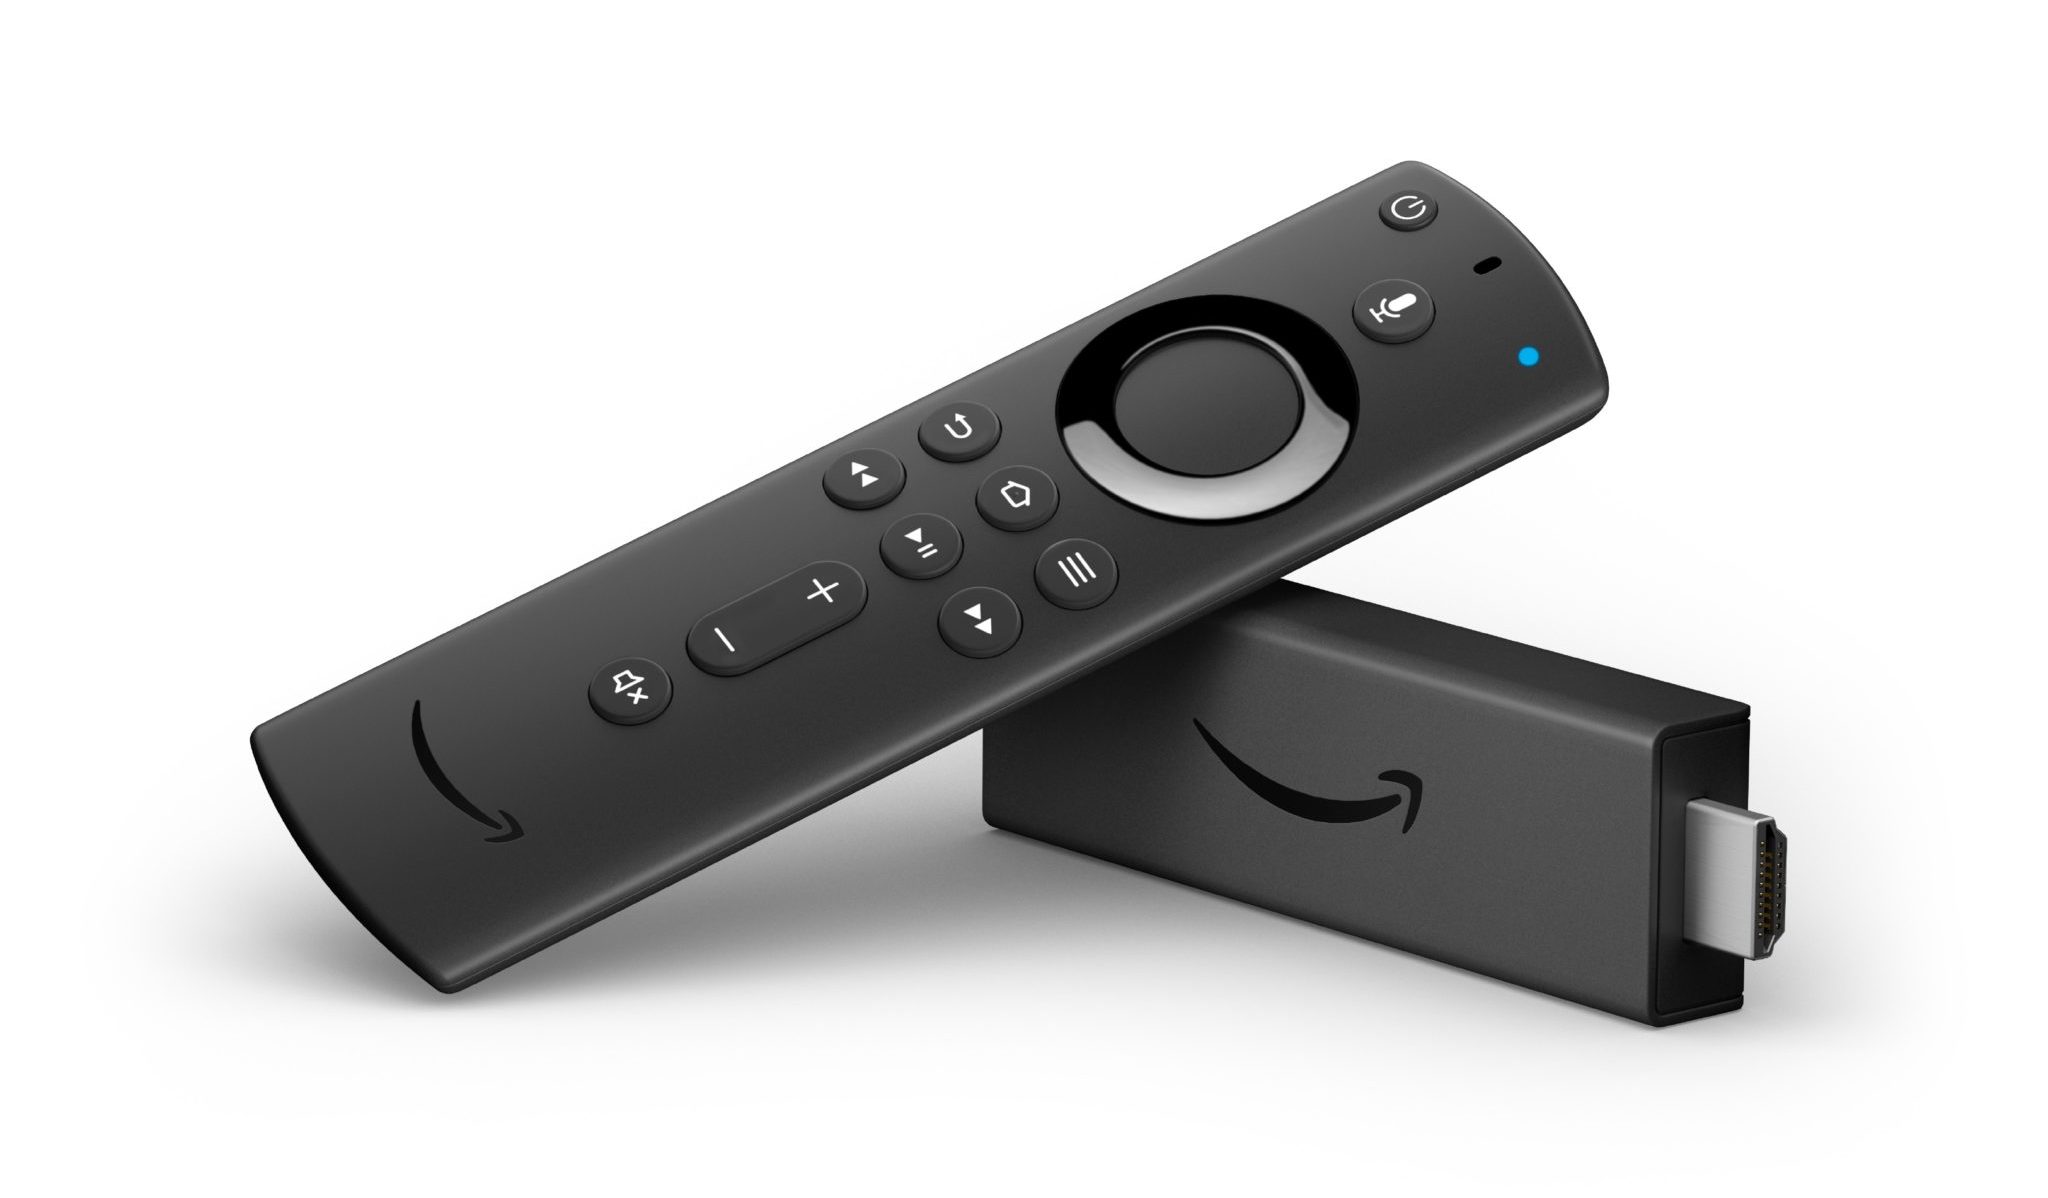 EXPIRED: Amazon’s Alexa Voice Remote With TV Controls For The Fire TV Is Now Just $19.99 (With Promo Code)